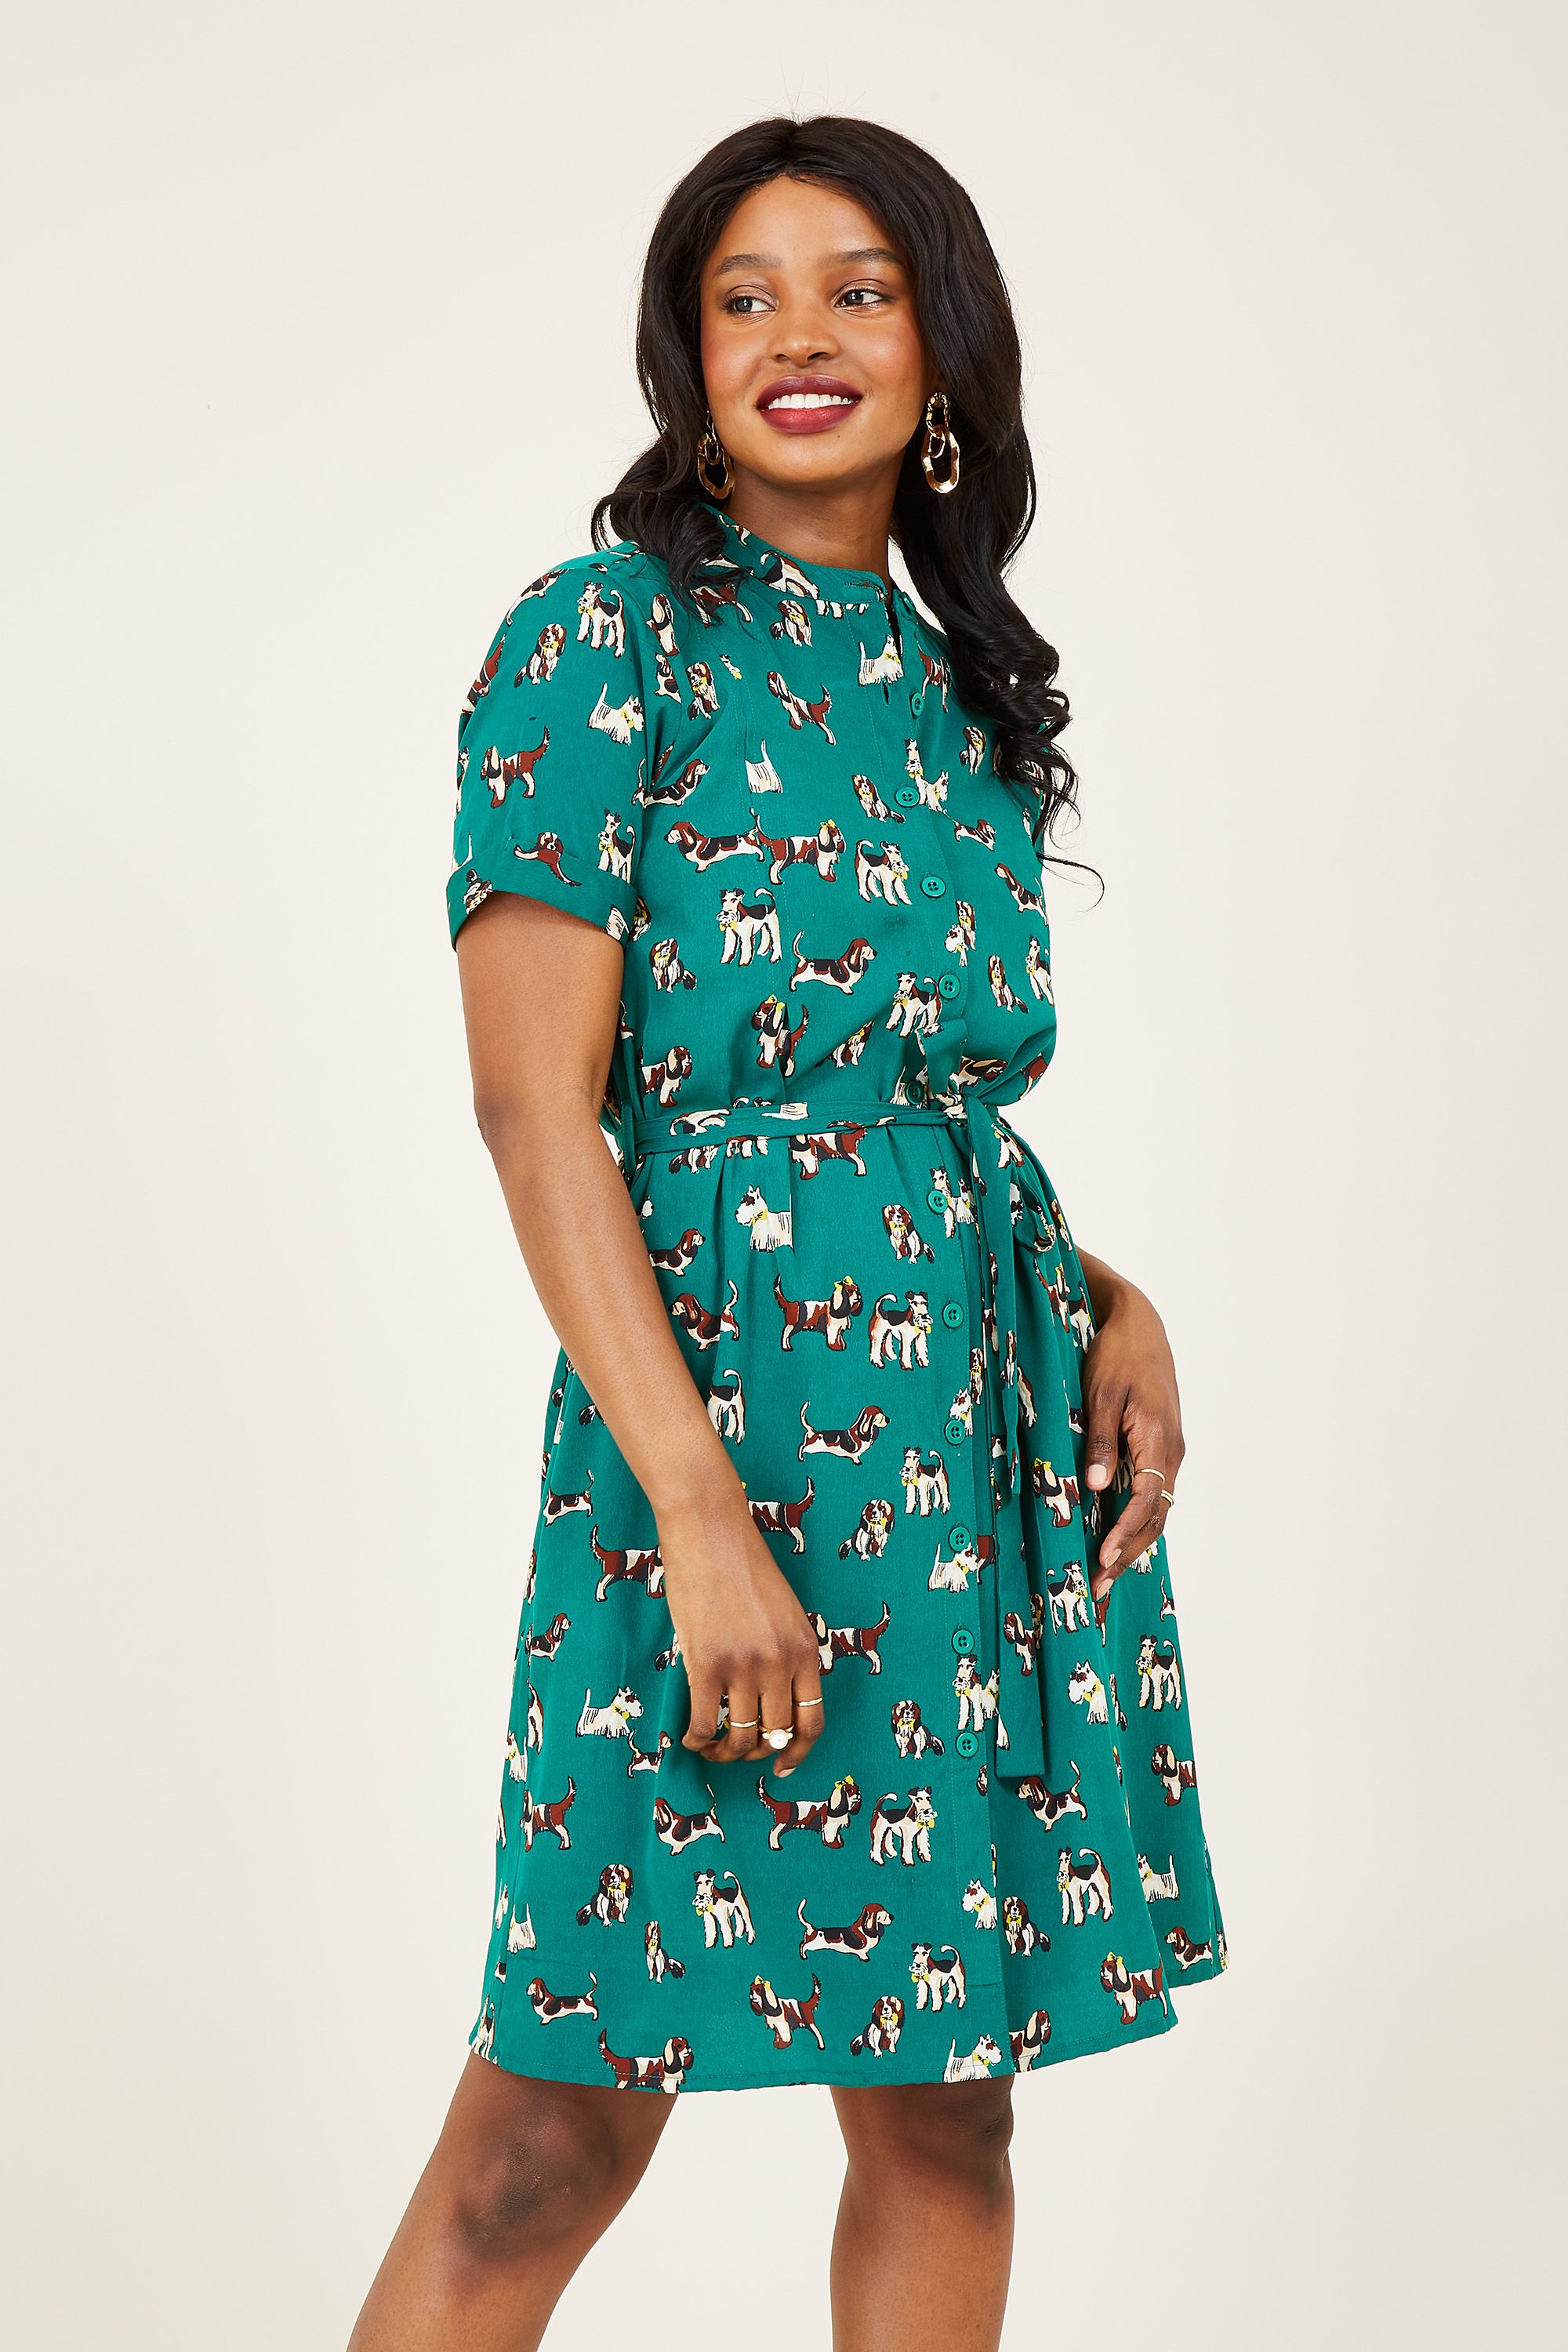 If there's one thing we love at Yumi, it's turning animals into quirky prints - meet our Dog Shirt Dress. In a versatile shape, it comes with utility details: buttons running down the front, rolled sleeves and pockets. The soft fabric makes it a comfortable choice, with a sweet collarless neckline to finish. Pair with a furry friend (we hope).